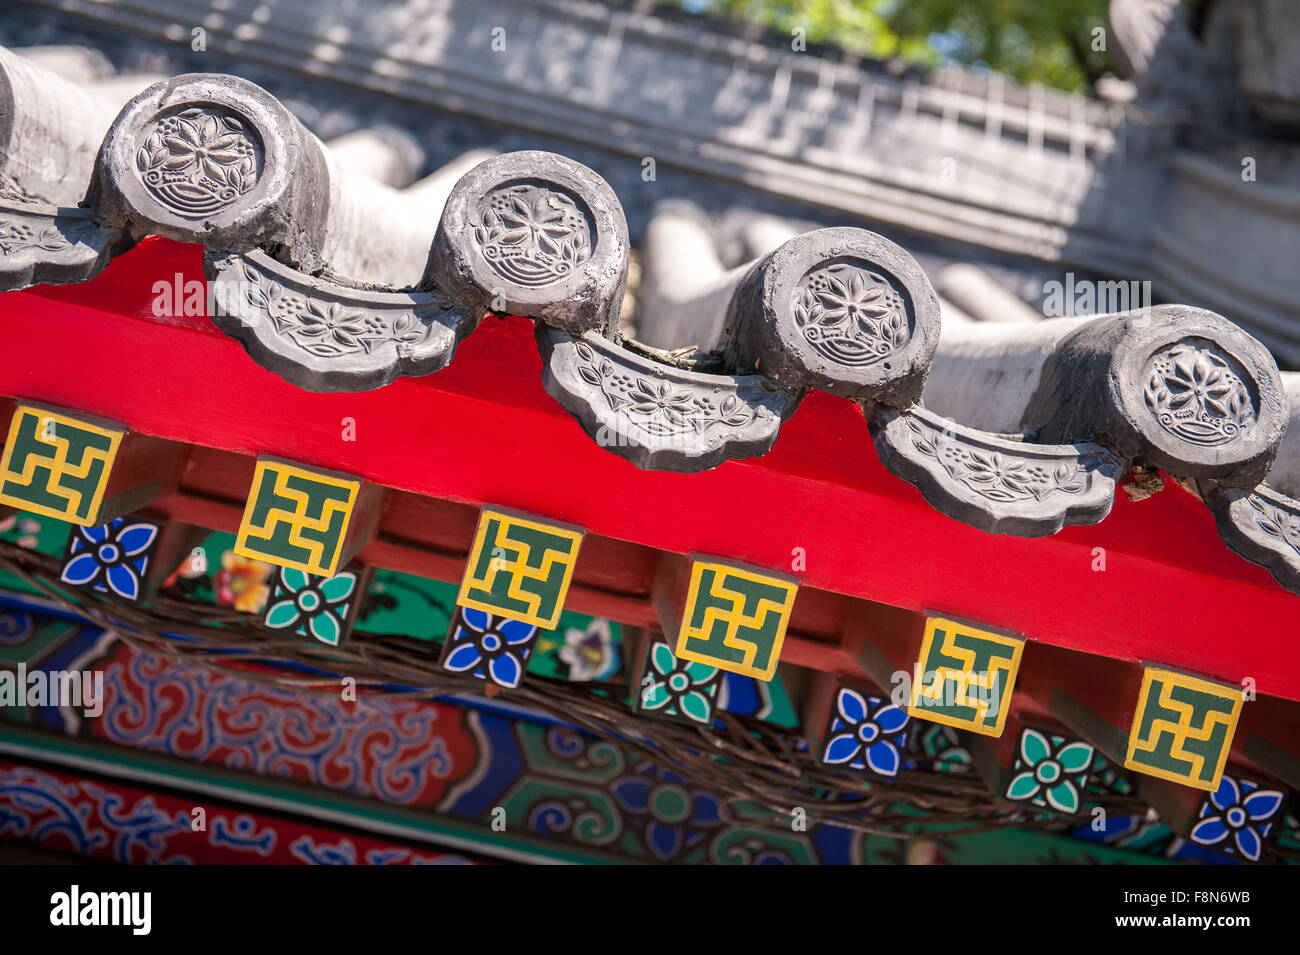 Chinese styled traditional roof decoration Stock Photo